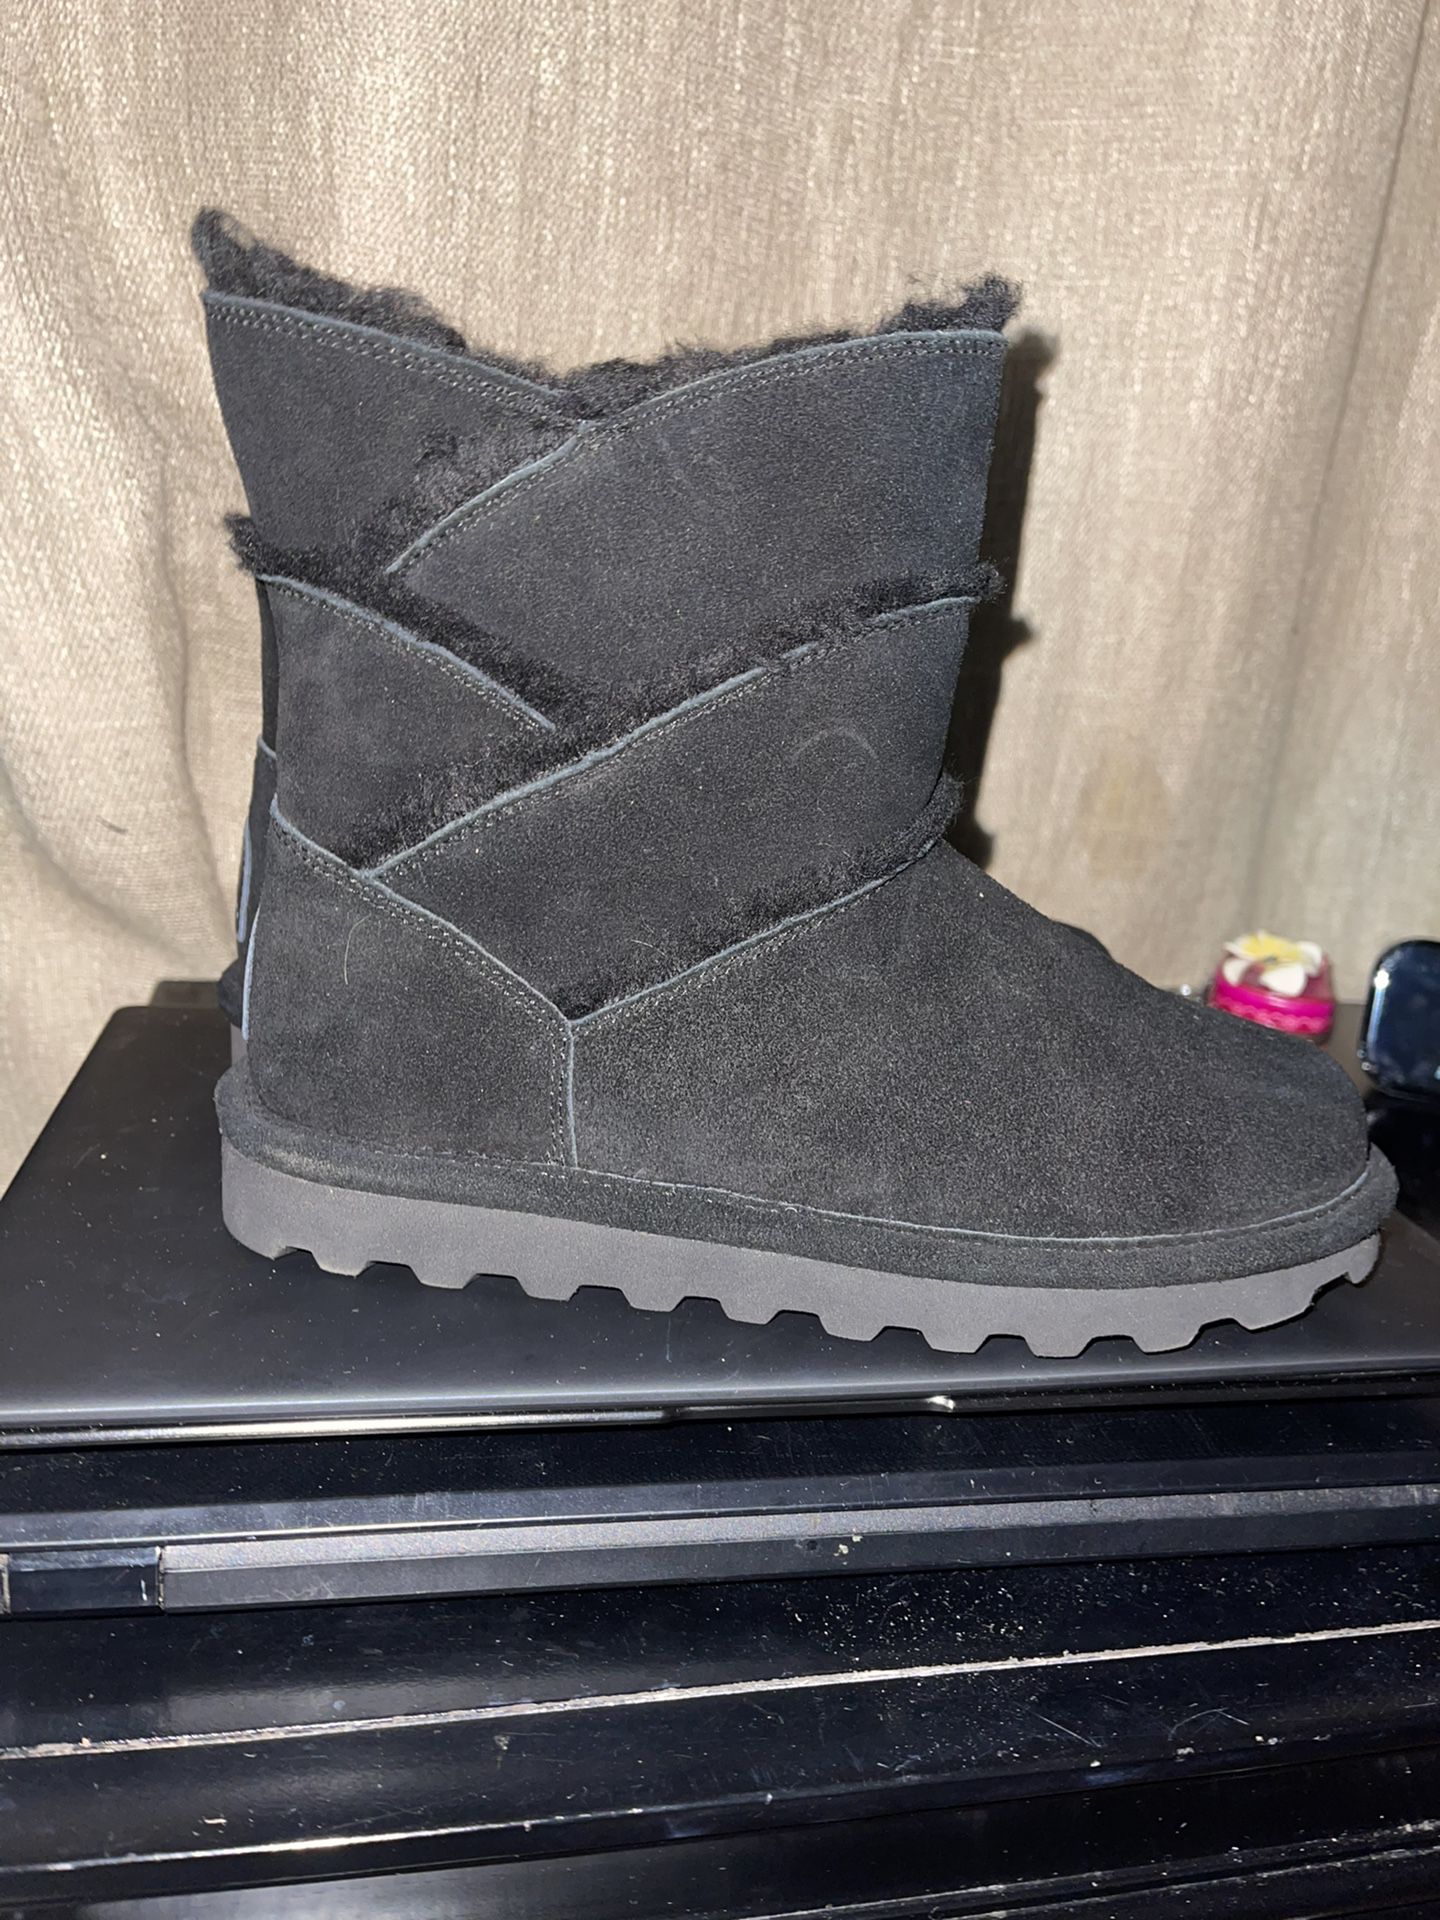 Bear Paw Boots Brand New Size 7